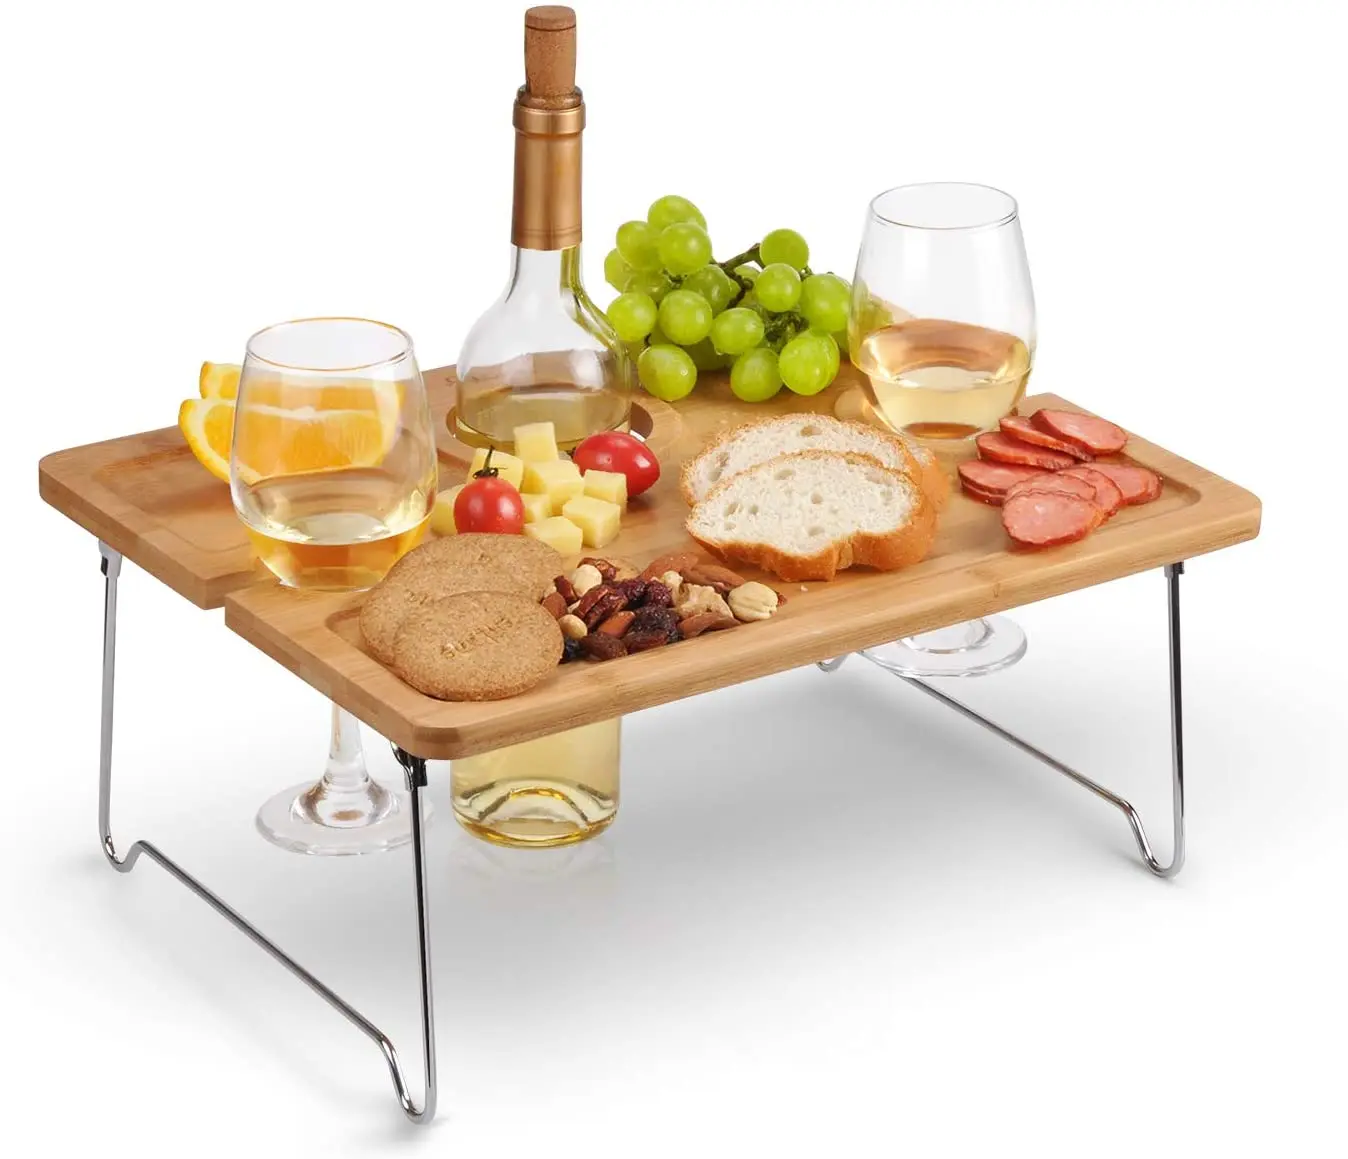 Deluxe Wooden Drinks Table Portable Bamboo Snack & Cheese,with Wine Glasses Holder for Outdoor Garden Concerts at Park Beach,Collapsible Table Yolluu Outdoor Wine Picnic Table 